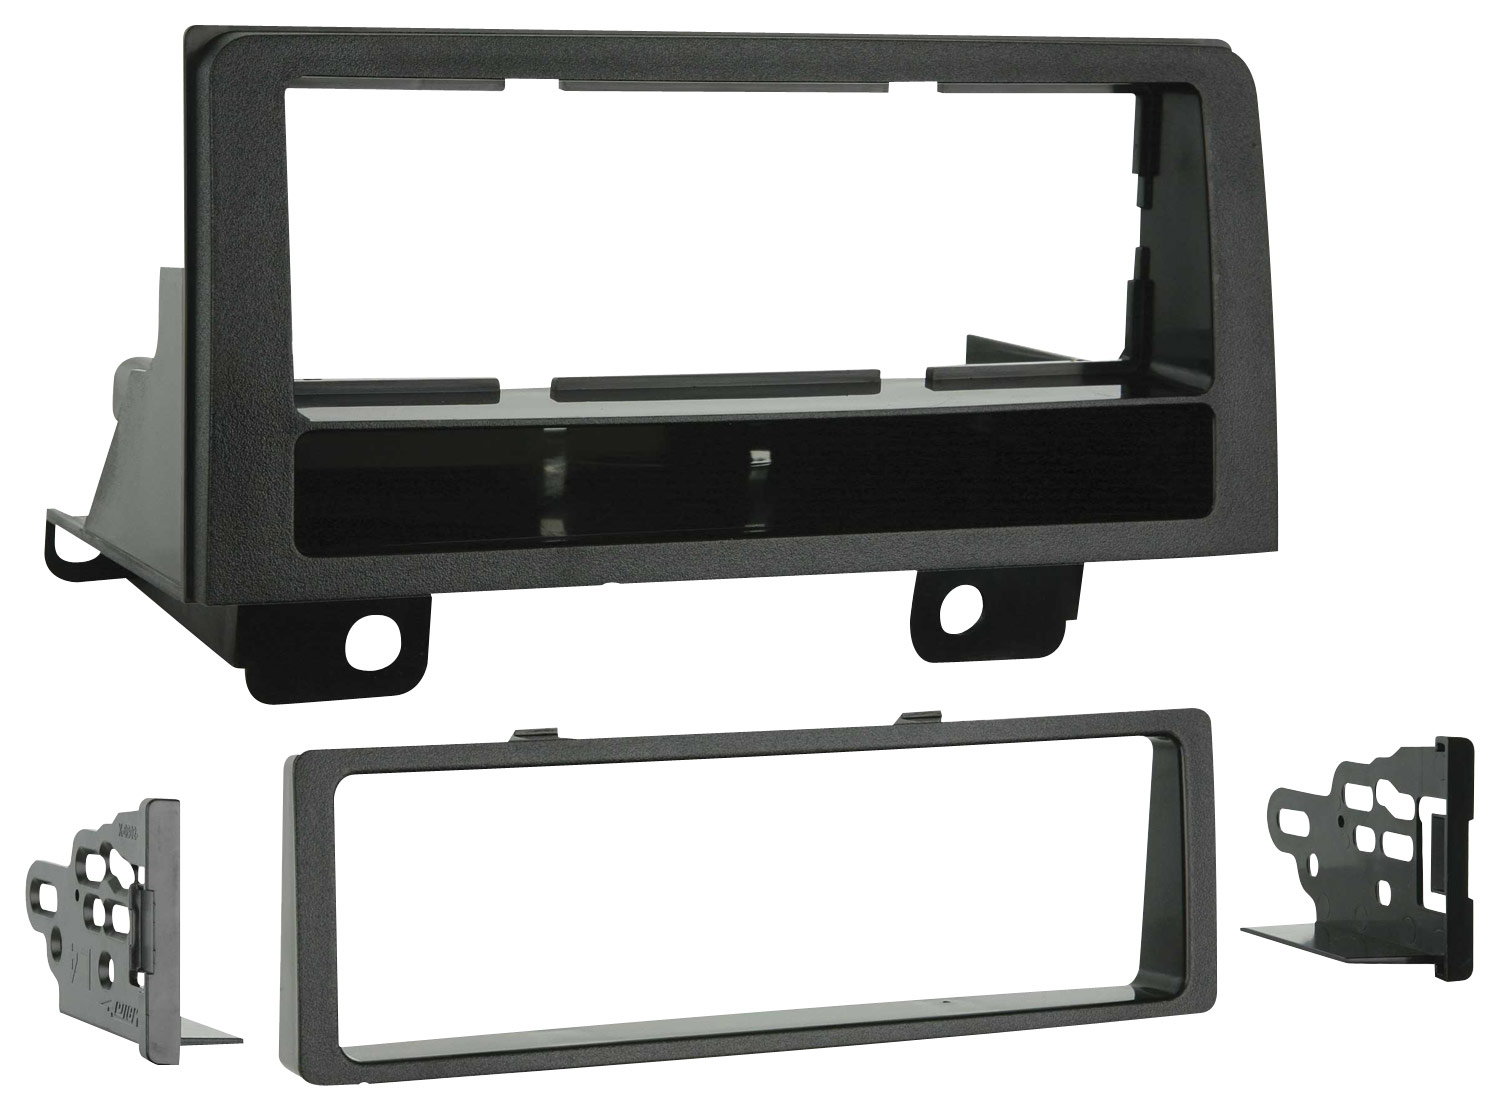 Metra - Dash Kit for Select 2003-2009 Toyota 4 Runner w/ RDS JBL radio - Black was $16.99 now $12.74 (25.0% off)